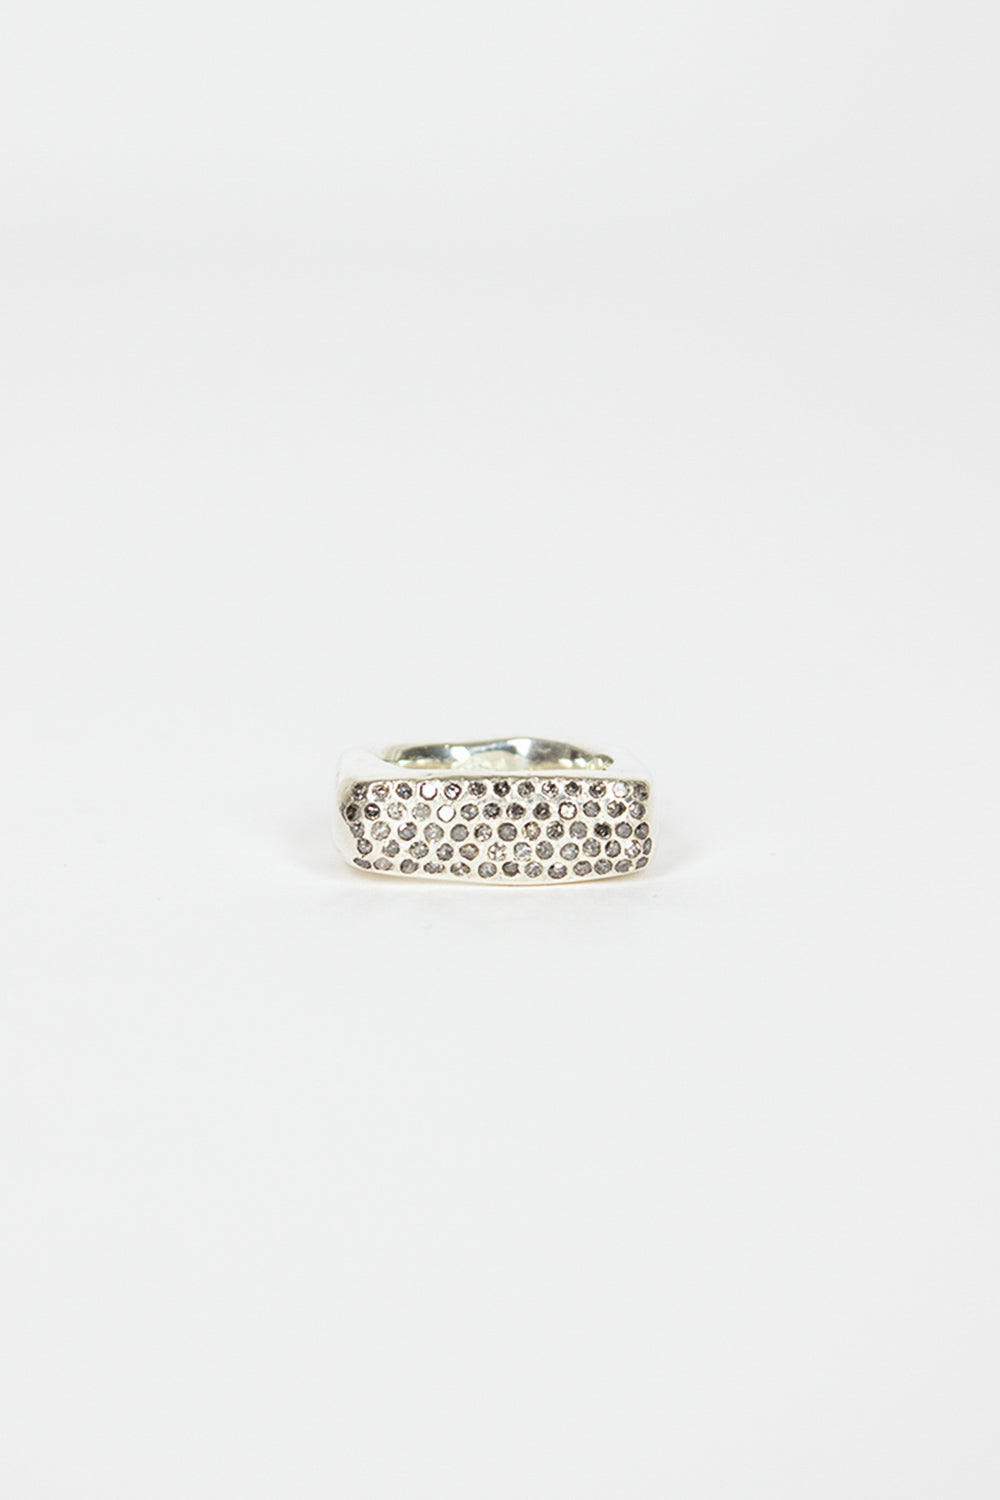 Sola 3 Sterling Silver Icy Diamond Ring